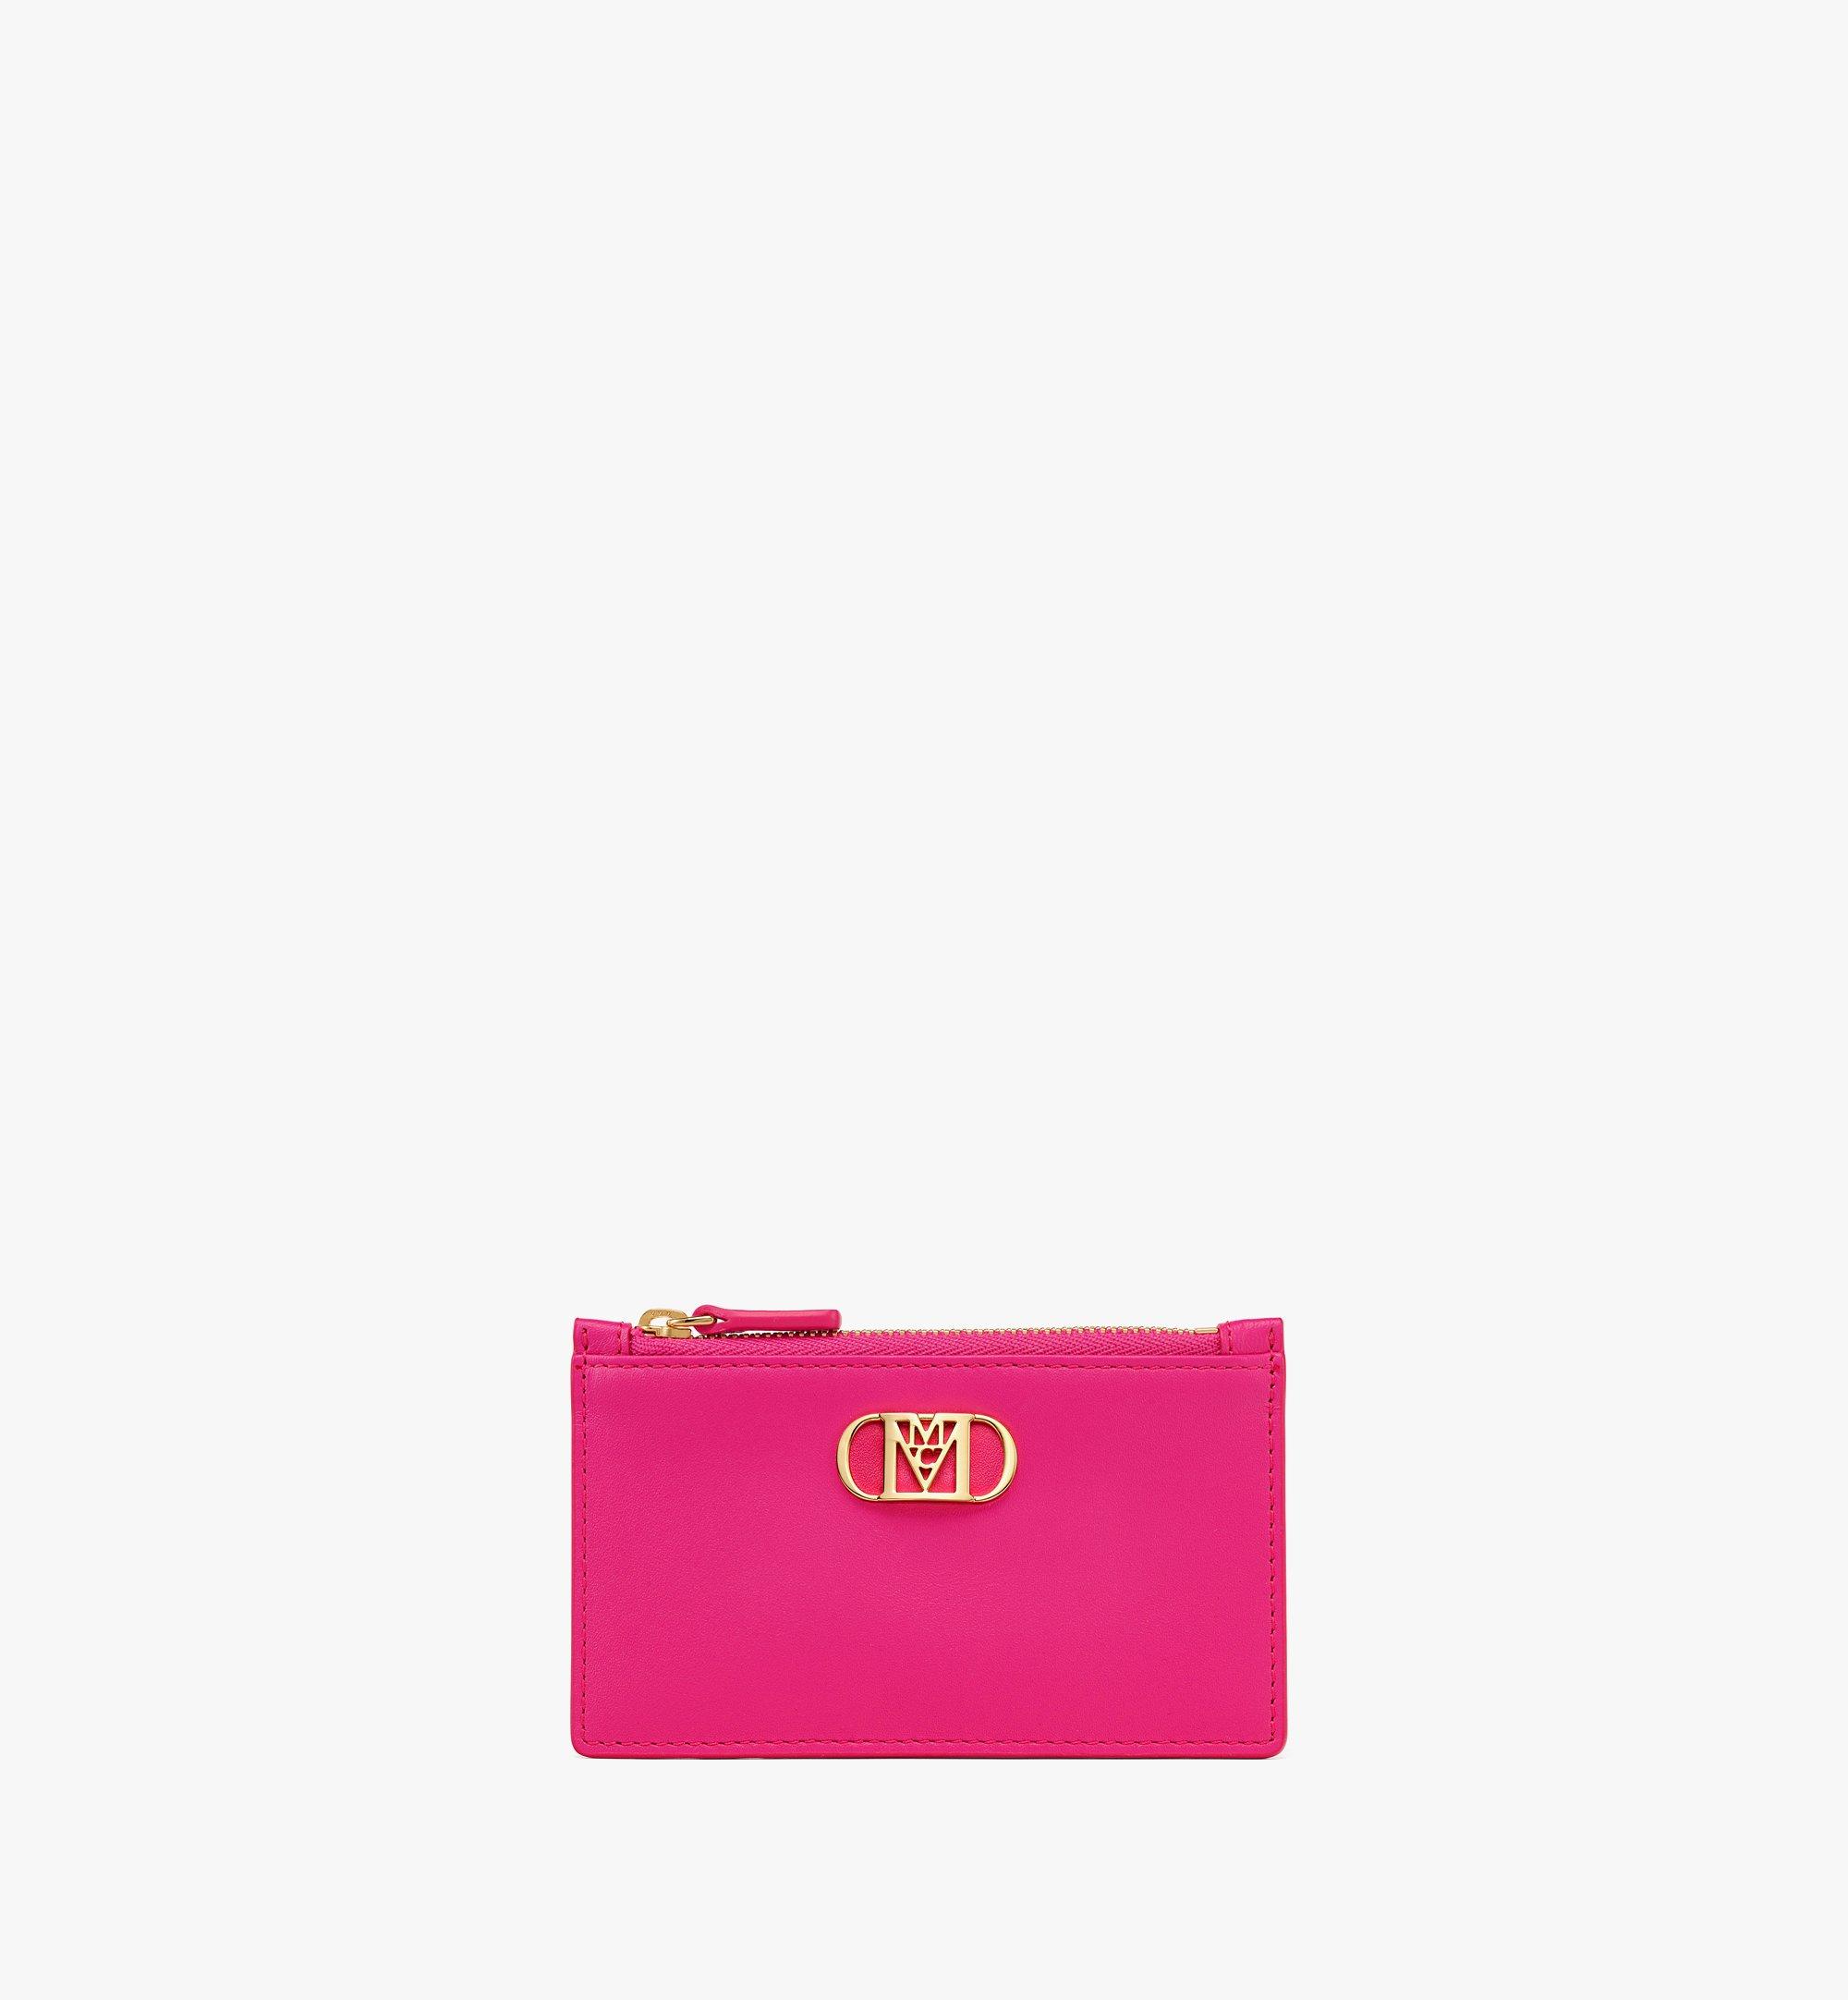 MCM Mode Travia Zip Card Case in Spanish Leather Pink MYACALD01QR001 Alternate View 1